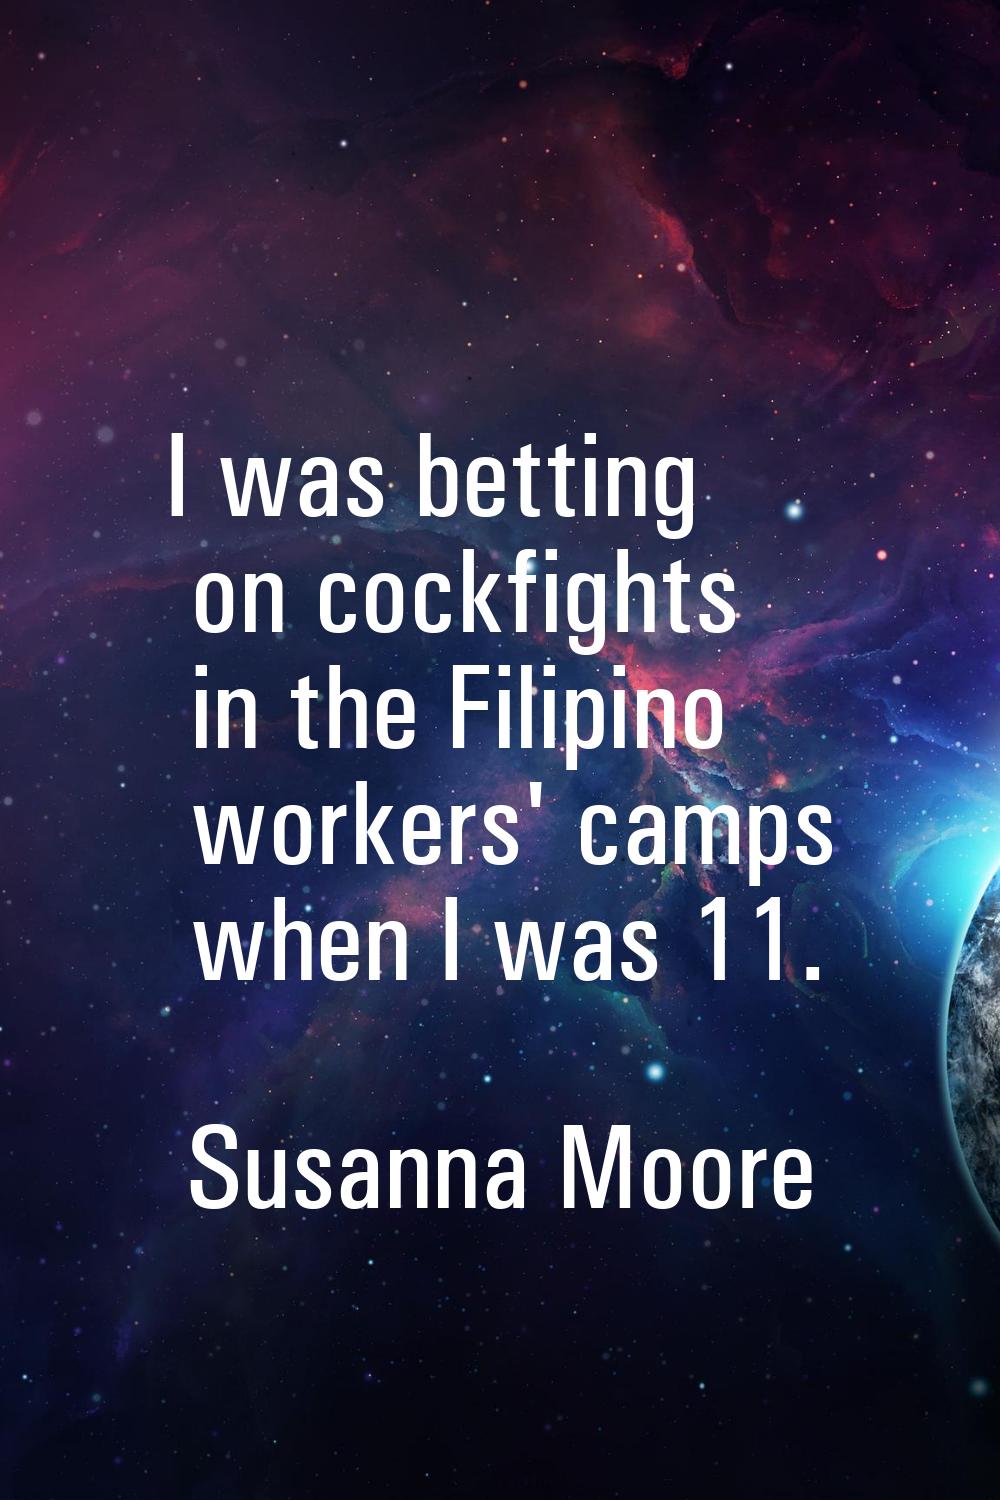 I was betting on cockfights in the Filipino workers' camps when I was 11.